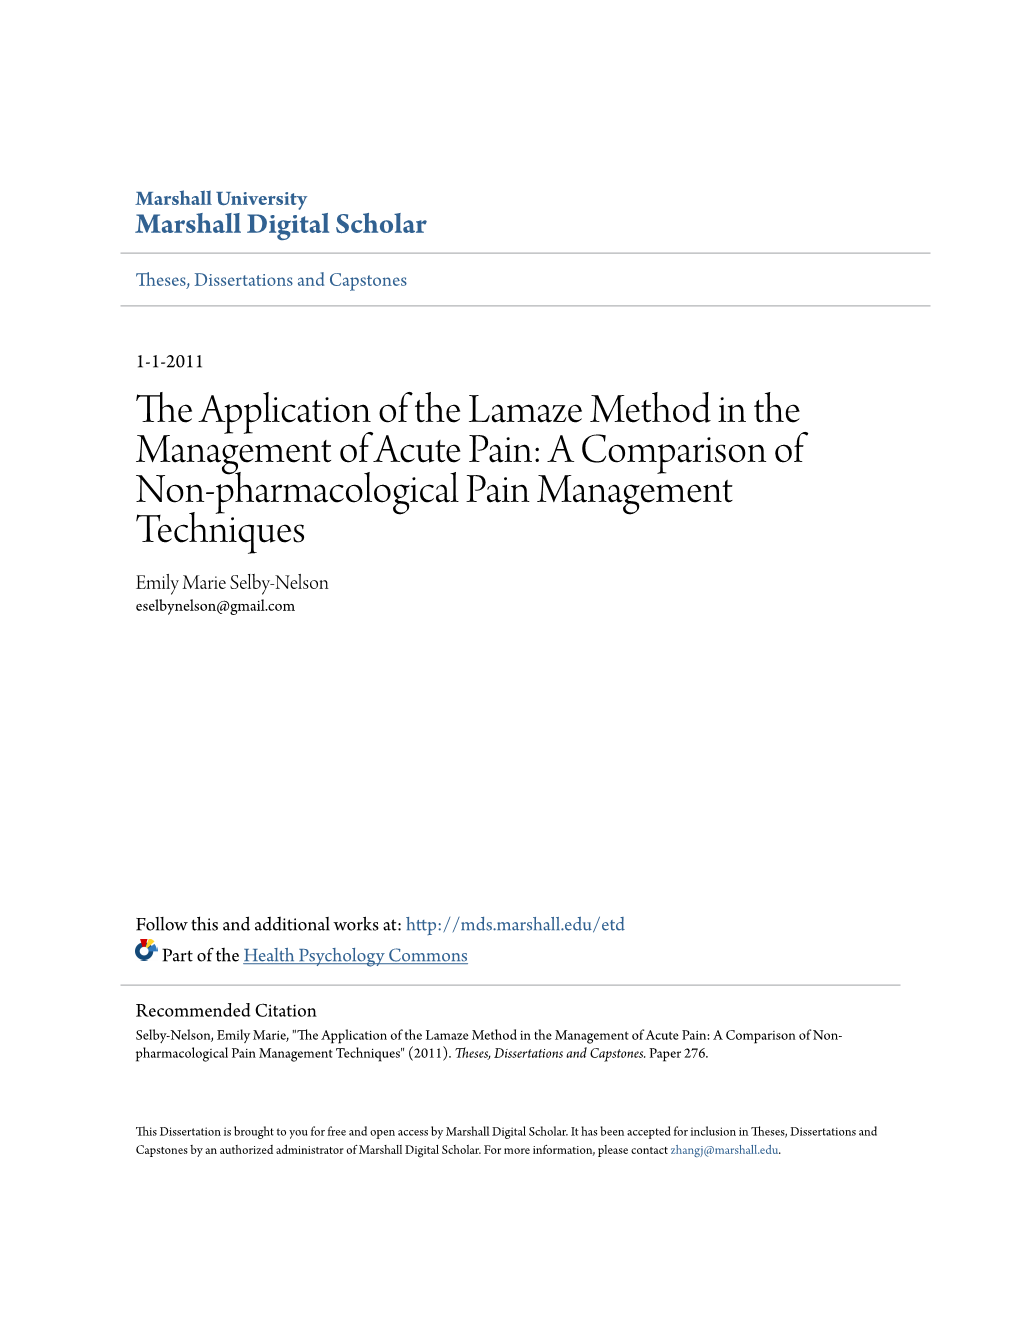 The Application of the Lamaze Method in the Management of Acute Pain